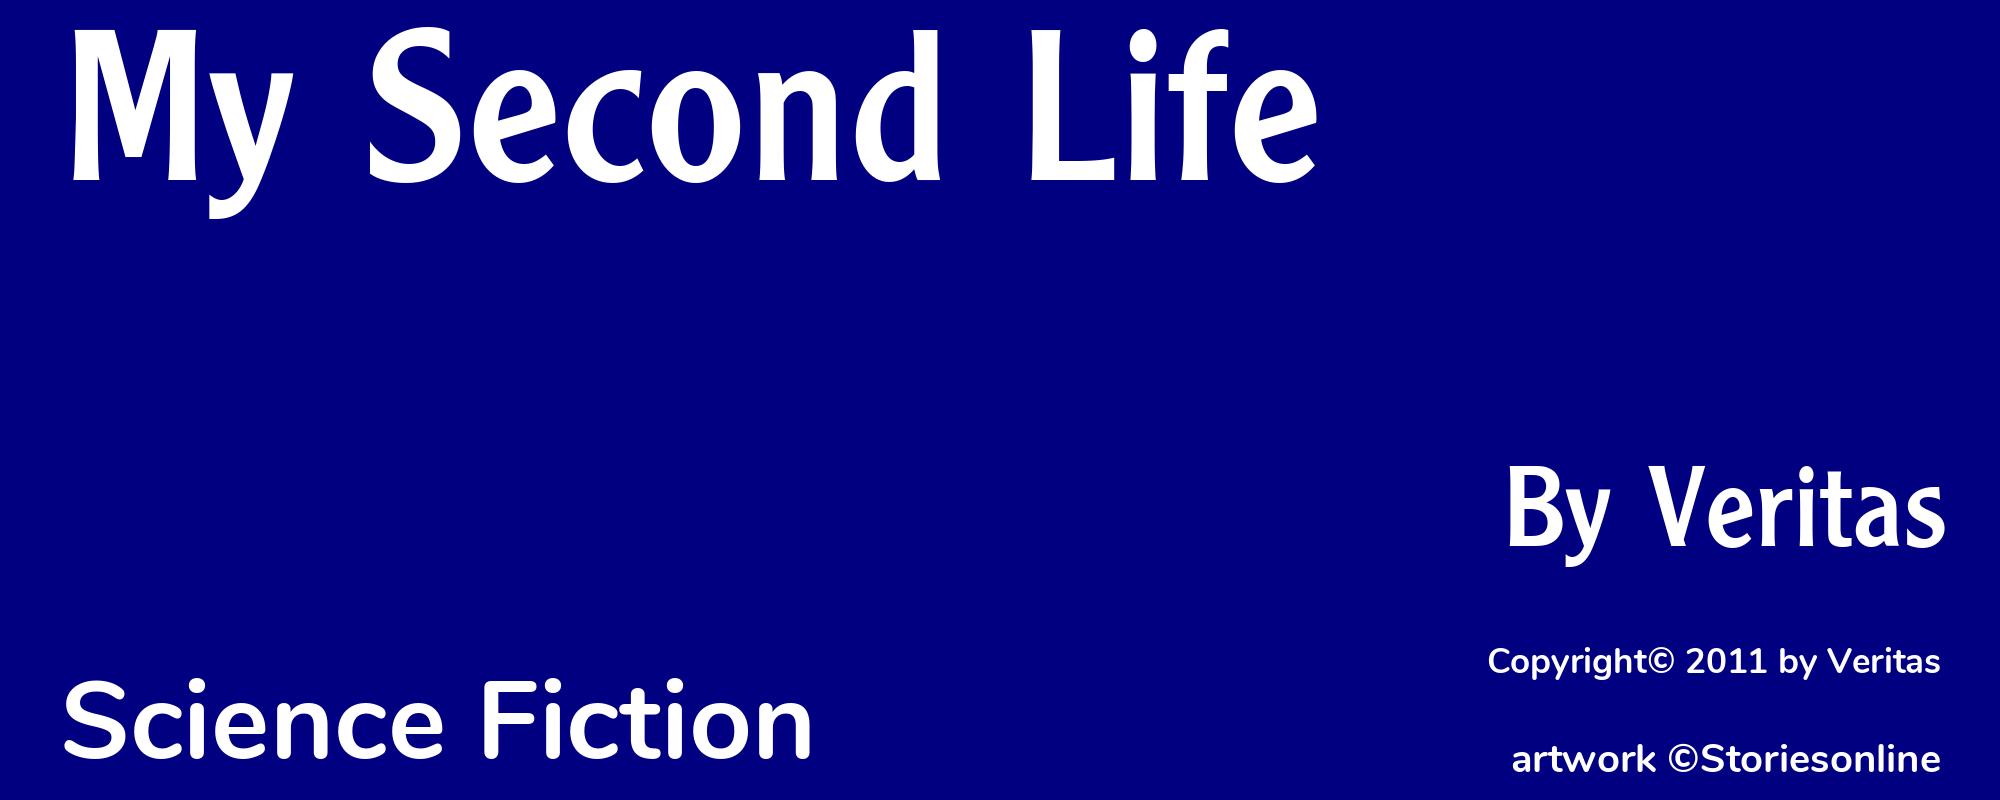 My Second Life - Cover